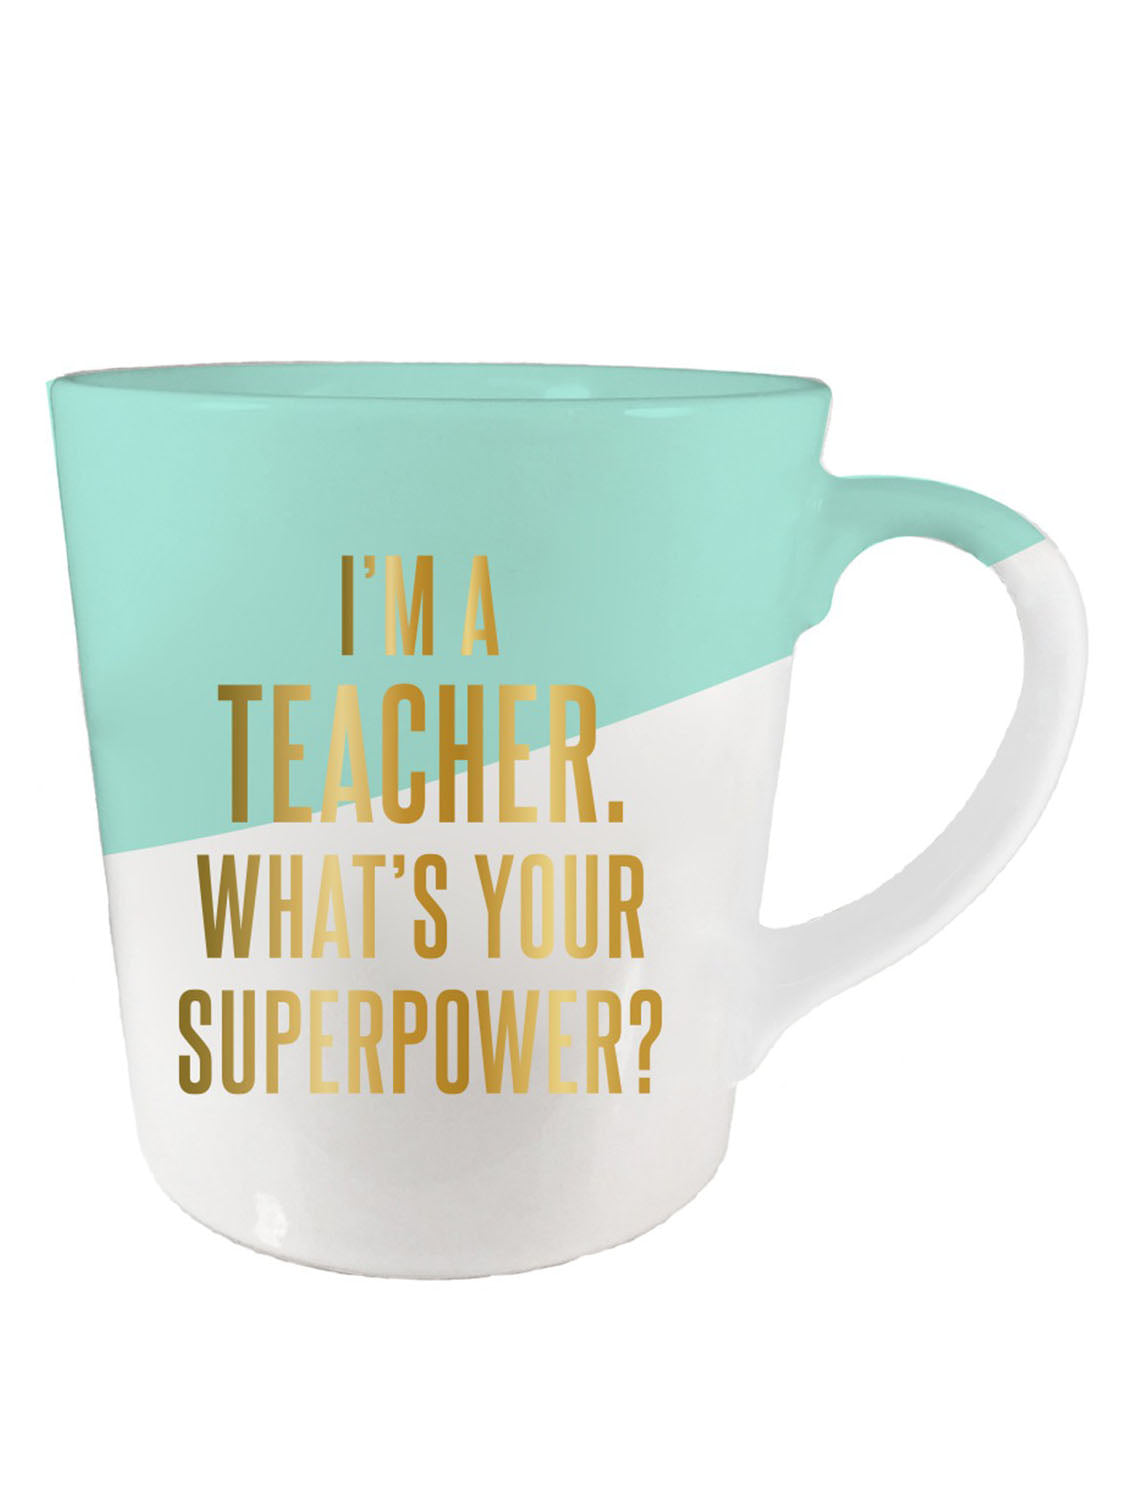 What's your Superpower Mug